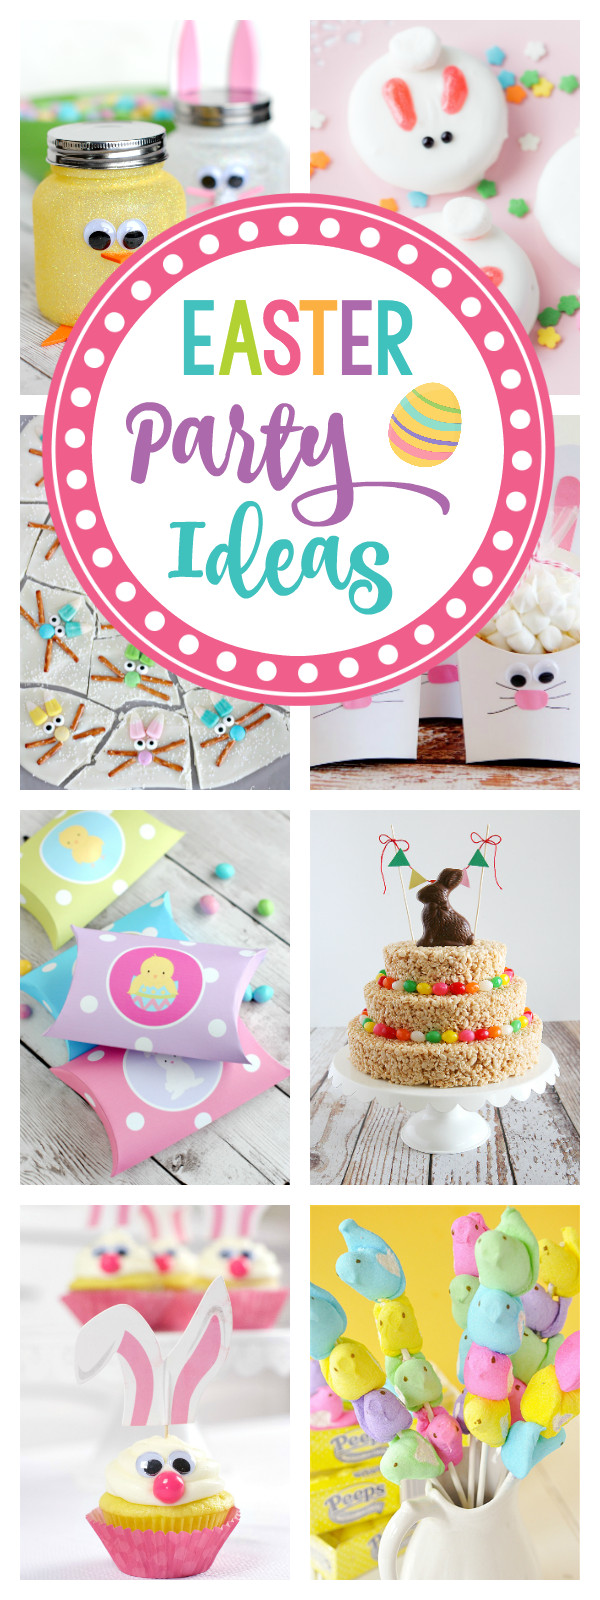 Easter Theme Party Ideas
 25 Fun Easter Party Ideas for Kids – Fun Squared